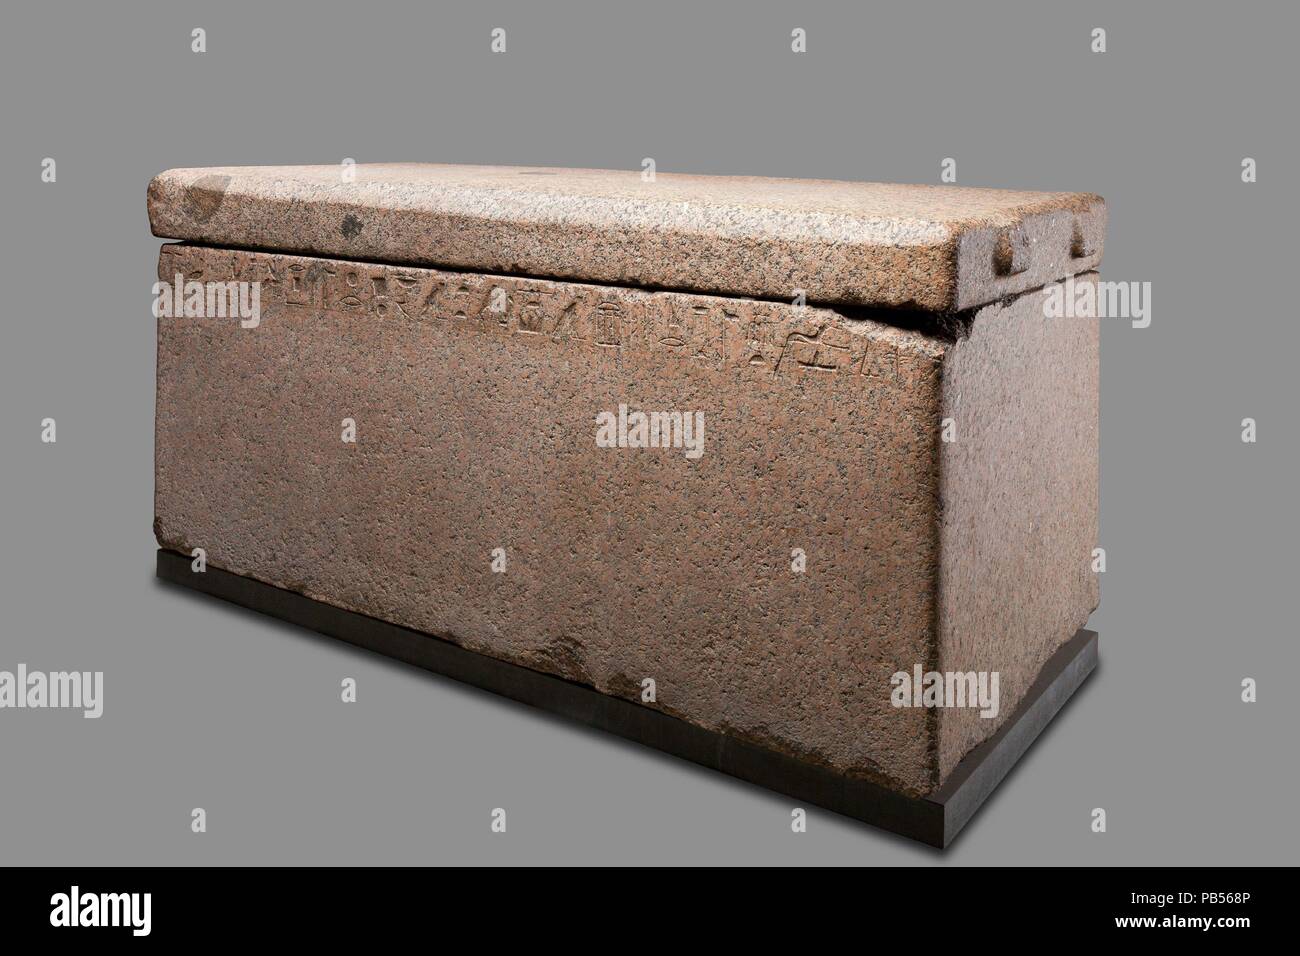 Sarcophagus of Mindjedef. Dimensions: L. 236.9 × W. 96.5 × H. 104.1 cm (93 1/4 × 38 × 41 in.). Dynasty: Dynasty 4. Reign: reign of Khafra or Menkaure. Date: ca. 2520-2472 B.C..  Mindjedef, who lived during the mid- to late 4th Dynasty, was buried in a large tomb on the east side of Khufu's pyramid. This red granite sarcophagus was found in the badly disturbed burial chamber, with a dismembered skeleton laid on top of its lid. The outstretched body would have likely been placed directly inside this stone coffer, perhaps laid on his left side and wrapped in linen covered with a layer of plaster  Stock Photo